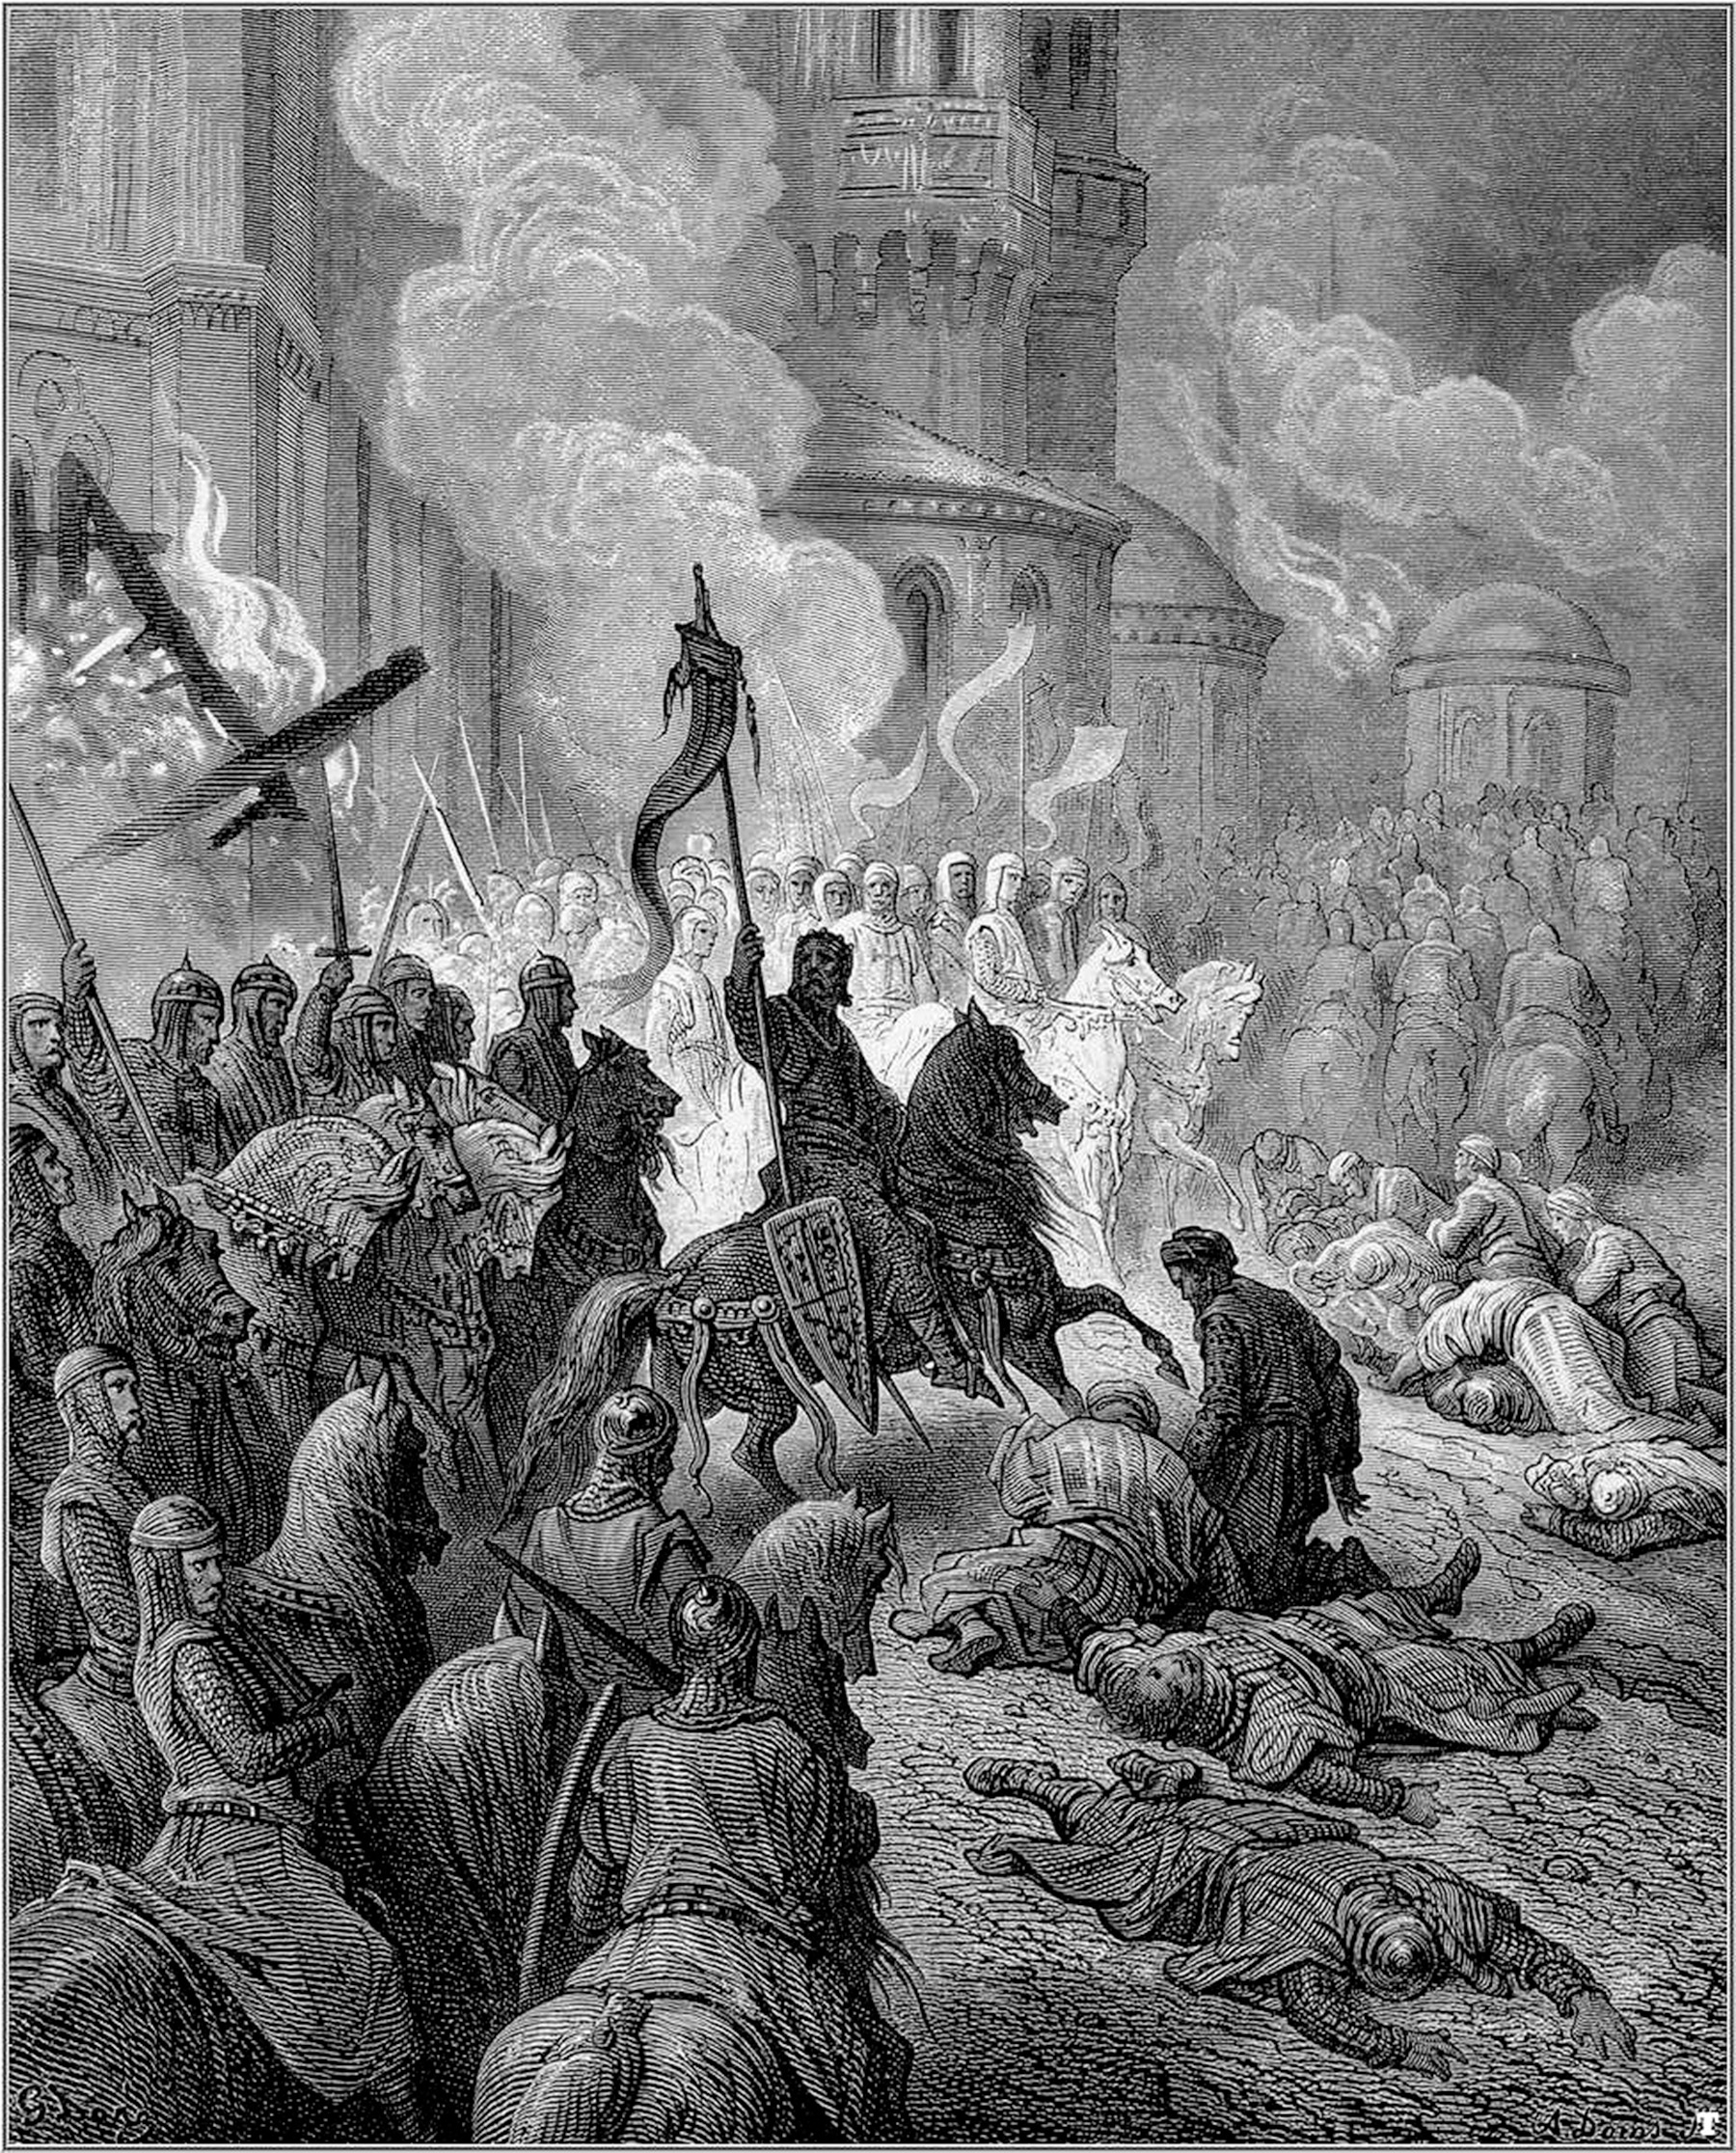 The Latin crusaders entered Constantinople not as liberators but as conquerors bent on exacting compensation from the city for Alexius IV’s failure to pay his outlandish debt to them. The first targets of the Latin soldiers during the sack of the city in April 1204 were the Orthodox churches and wealthy citizens.